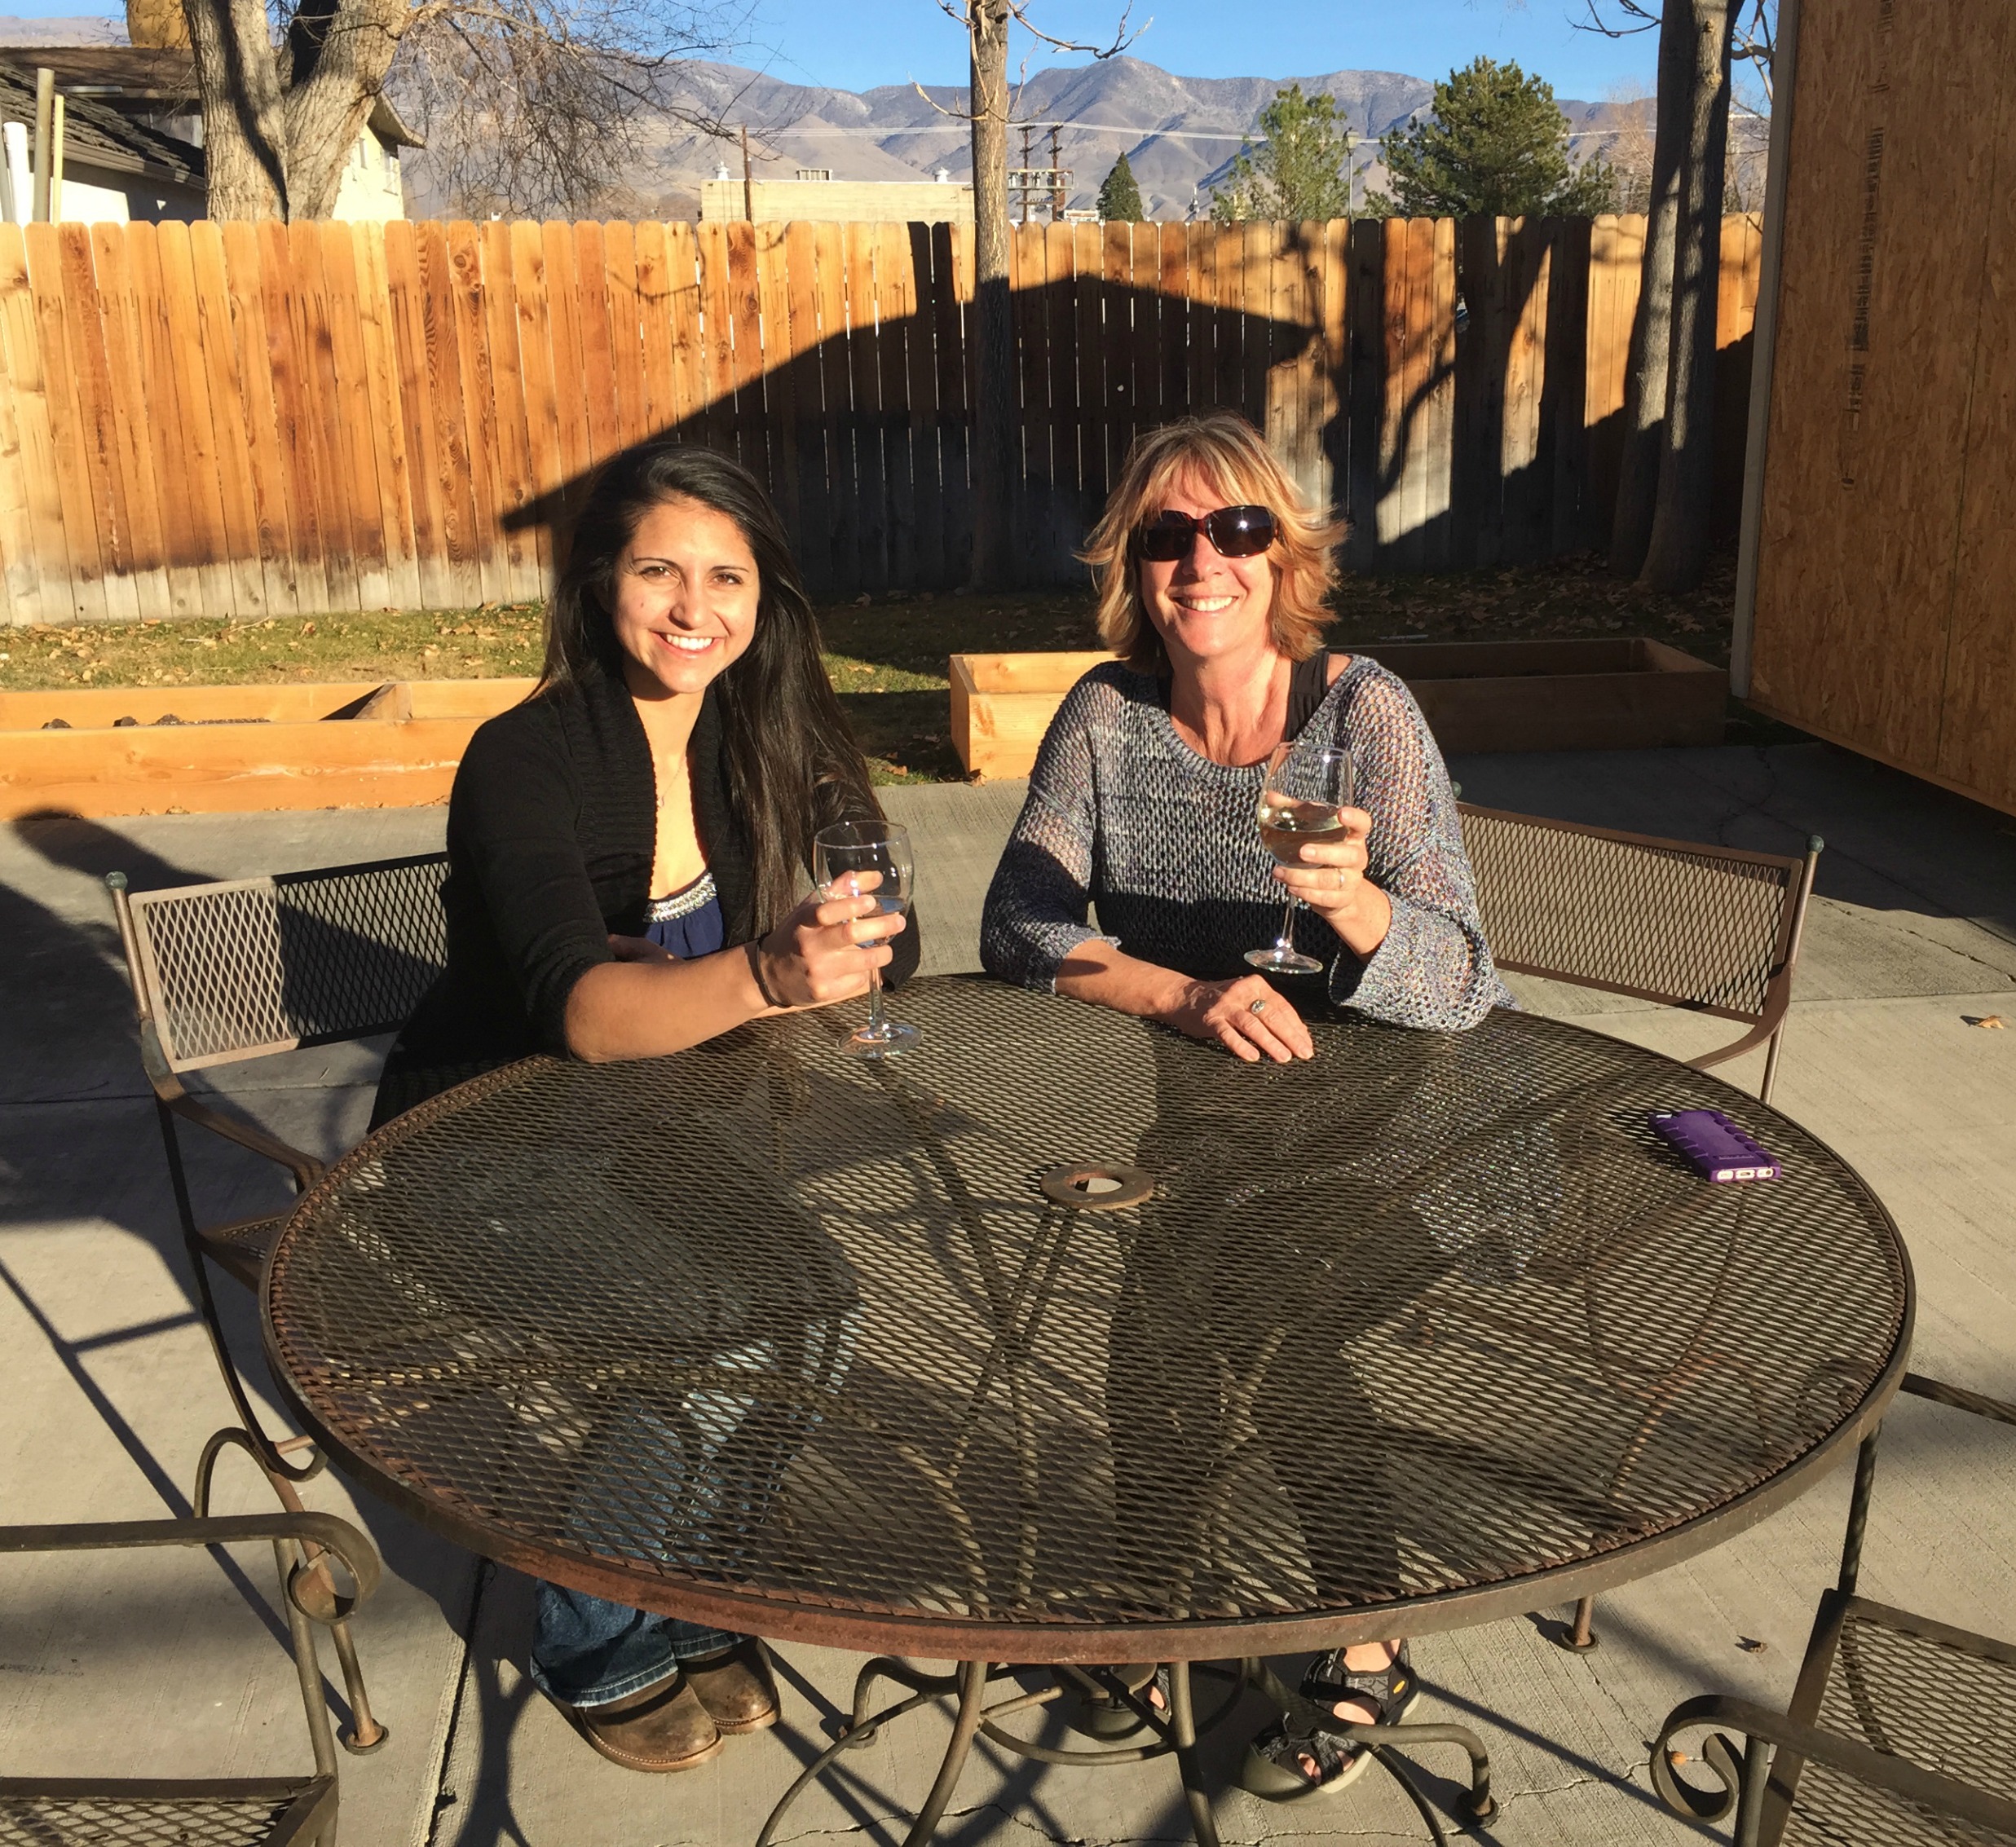 Mini and Kay enjoying a glass of wine in the backyard at the end of a long workweek!